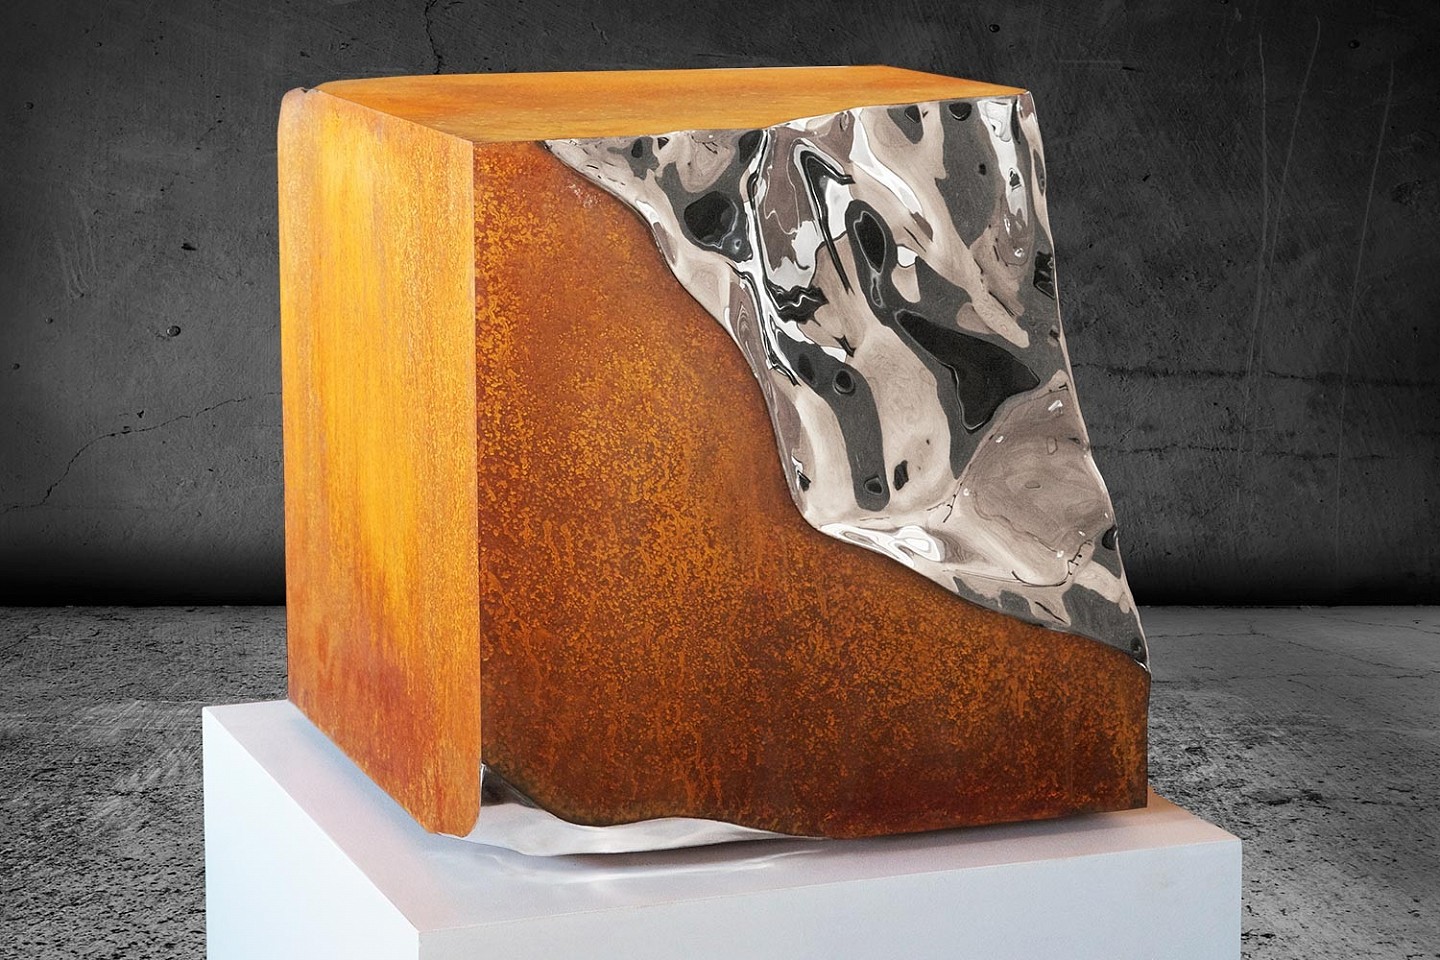 Jonathan Prince, Alembic Cube
stainless steel
PRIN0005